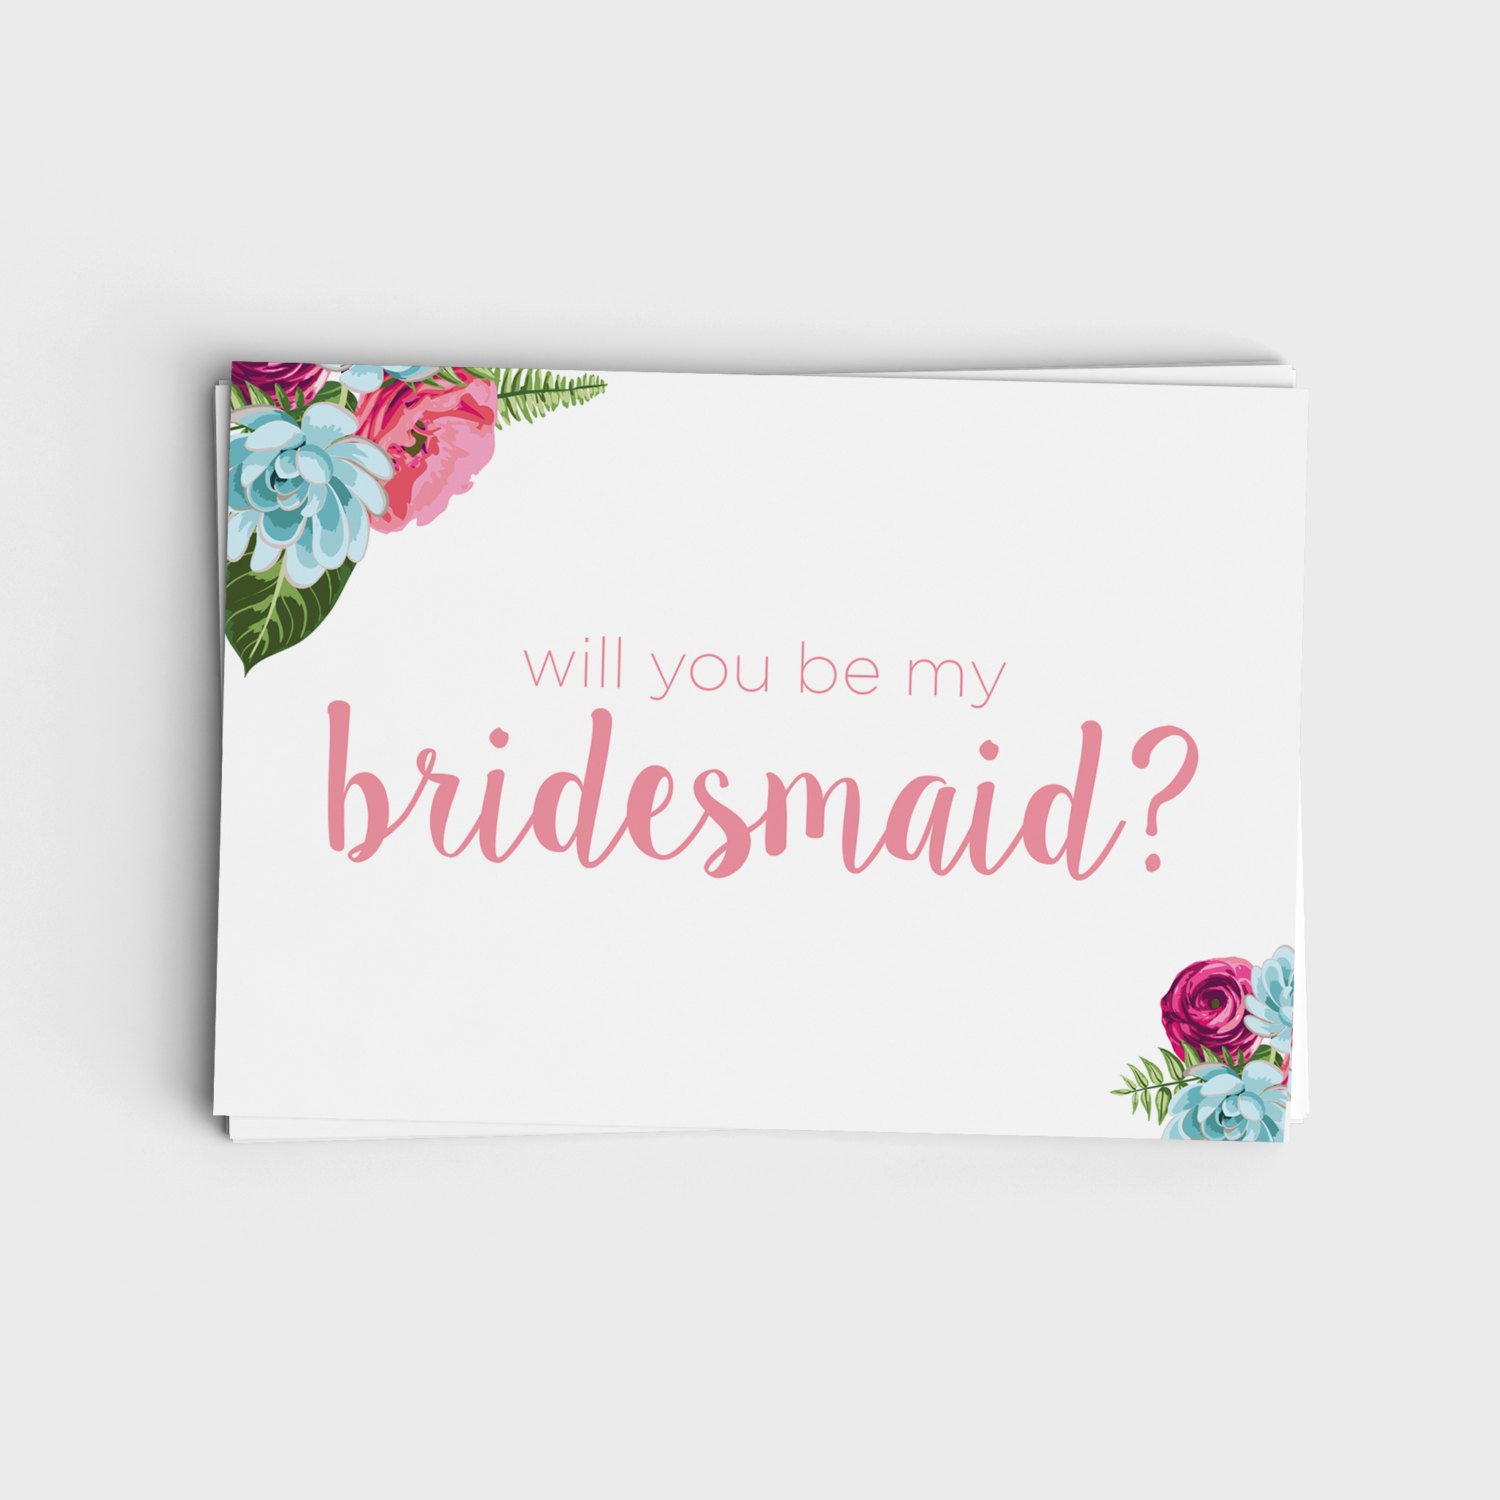 Be My Bridesmaid Card  Favors & Stuff Intended For Will You Be My Bridesmaid Card Template